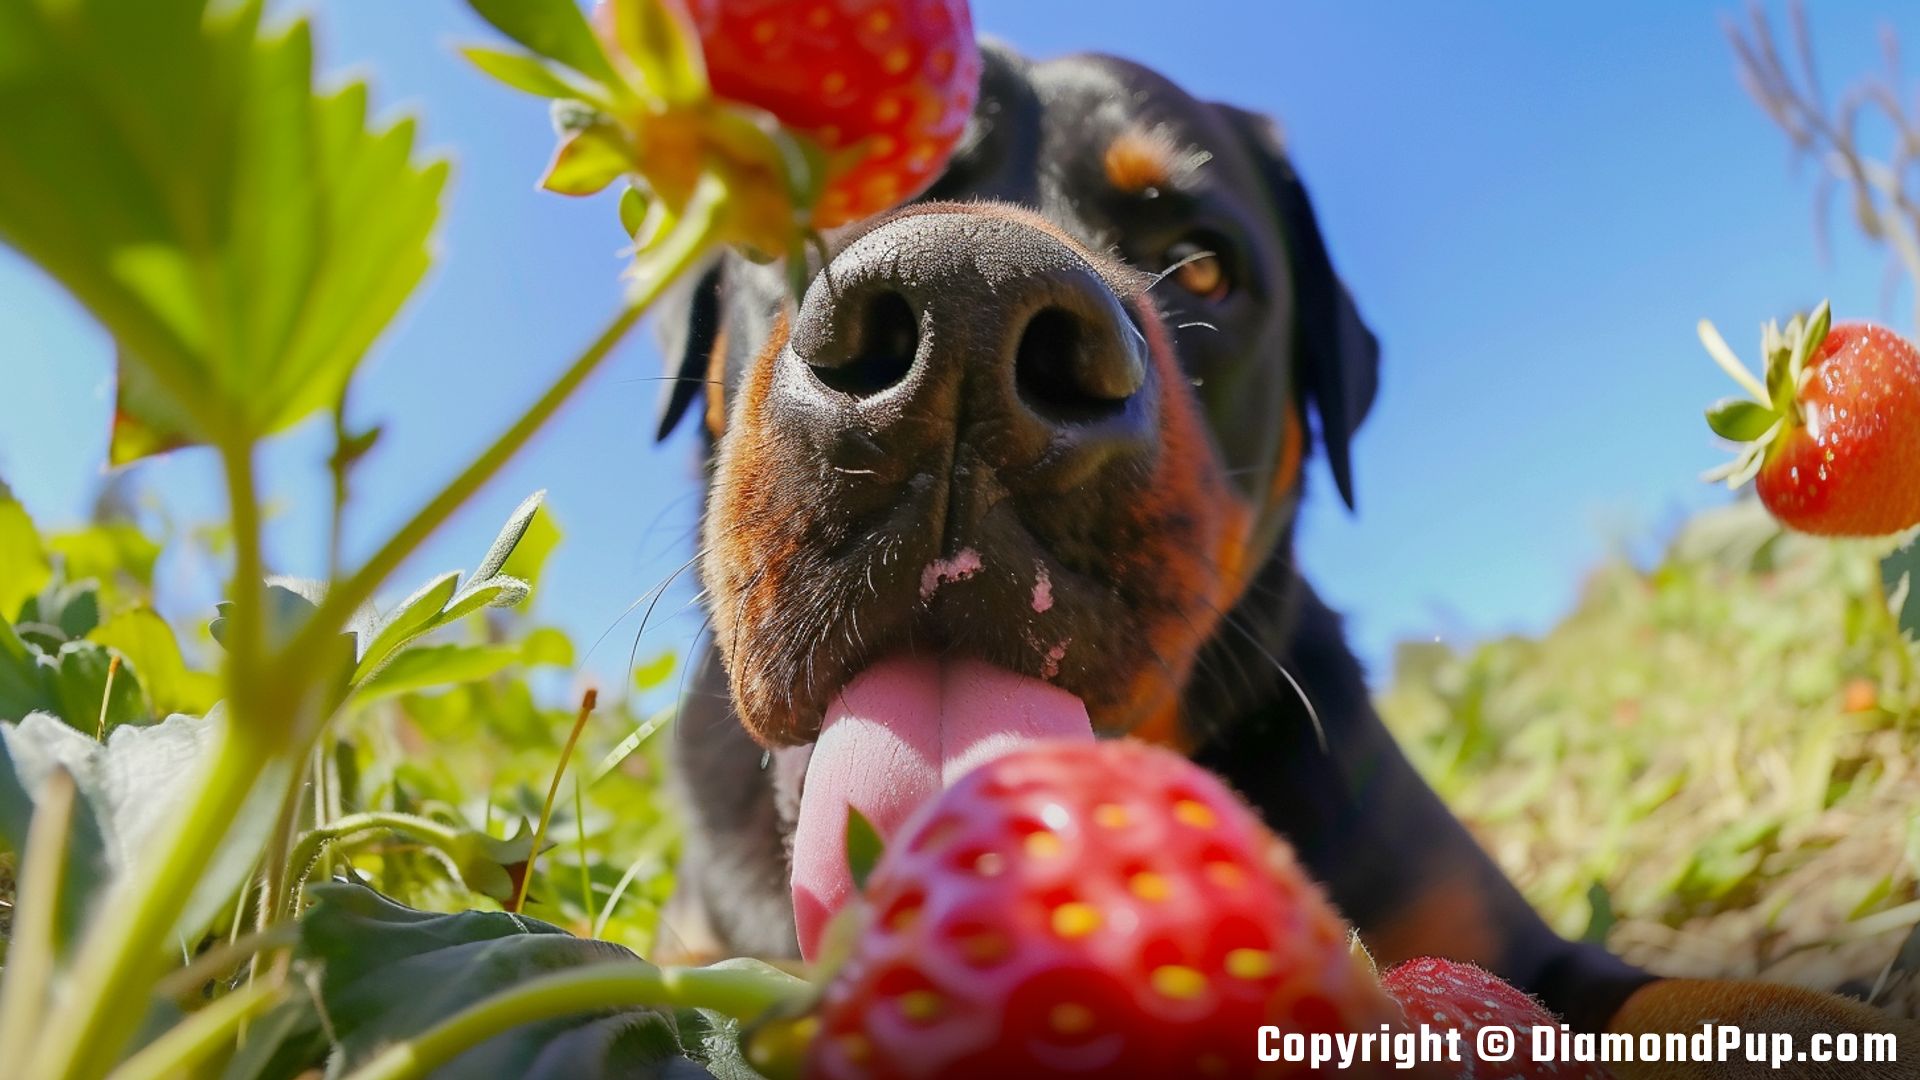 Image of an Adorable Rottweiler Snacking on Strawberries